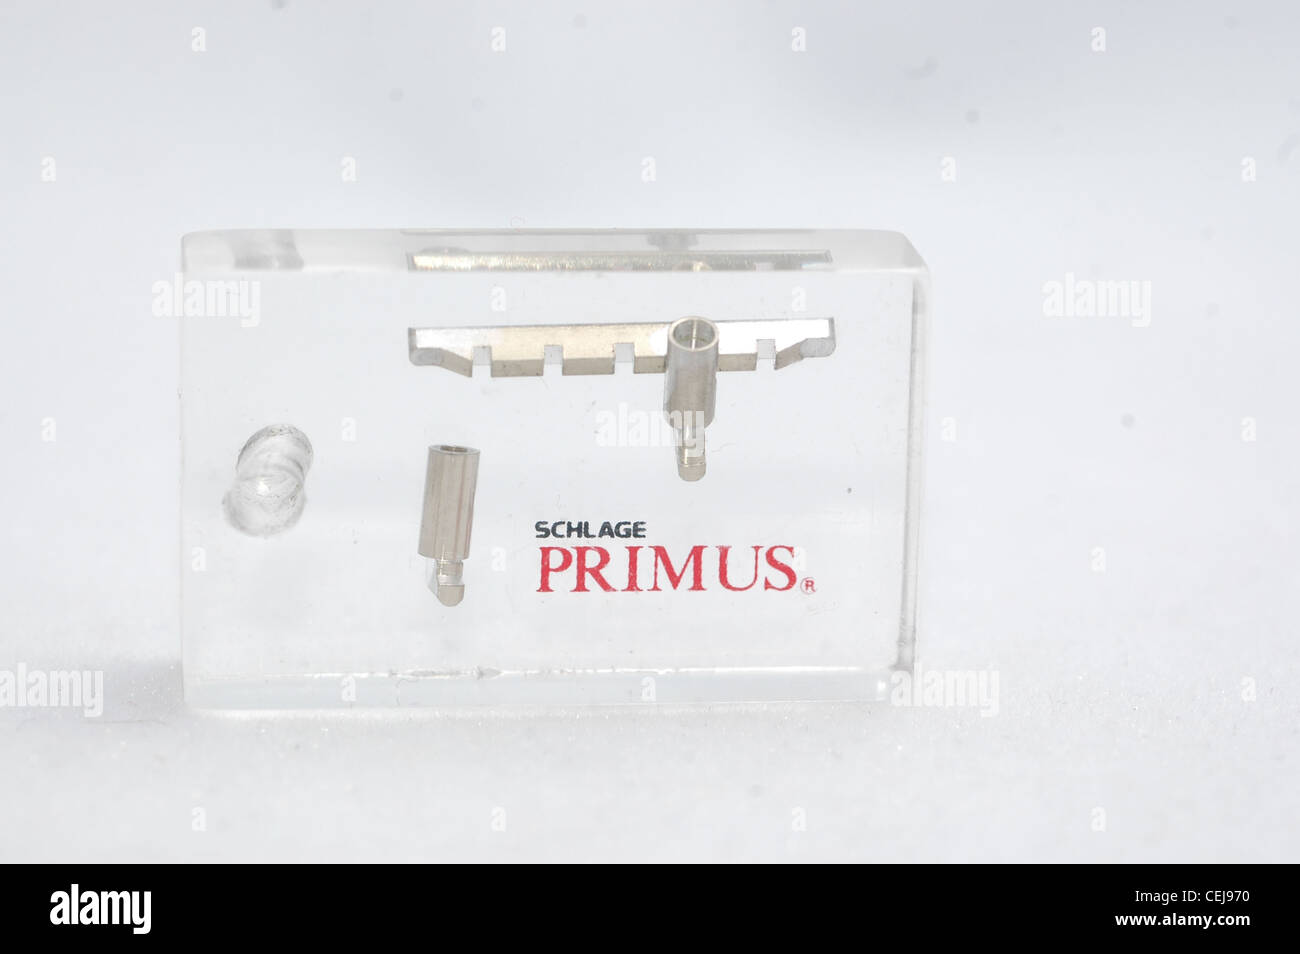 Schlage Primus Lock Pins and Sidebar Stock Photo